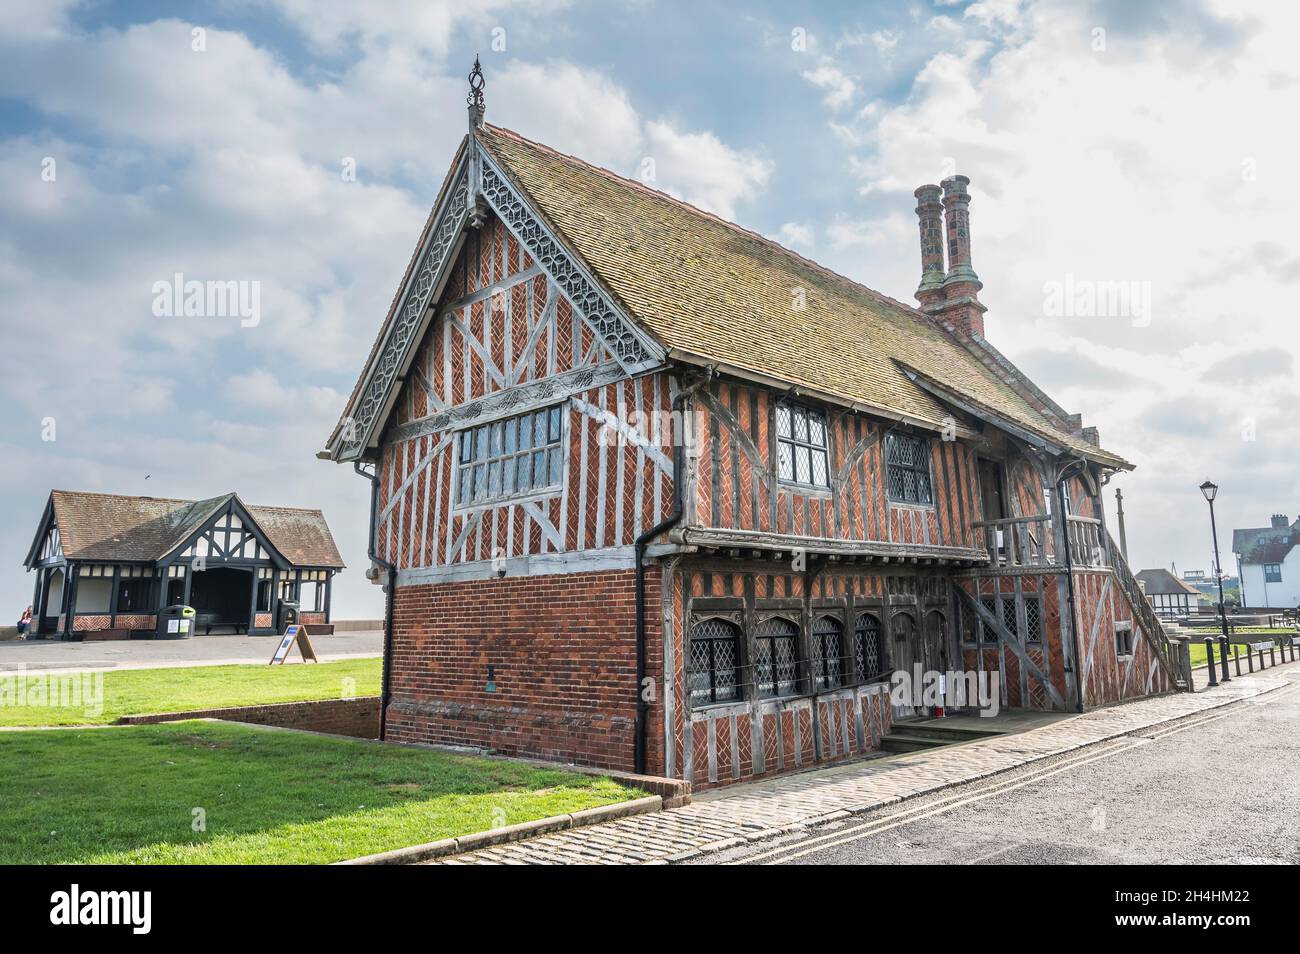 This medieval building is Moot Hall located on the promenade of the Suffolk Coast and historical resort town of Aldeburgh, the town that time forgot Stock Photo